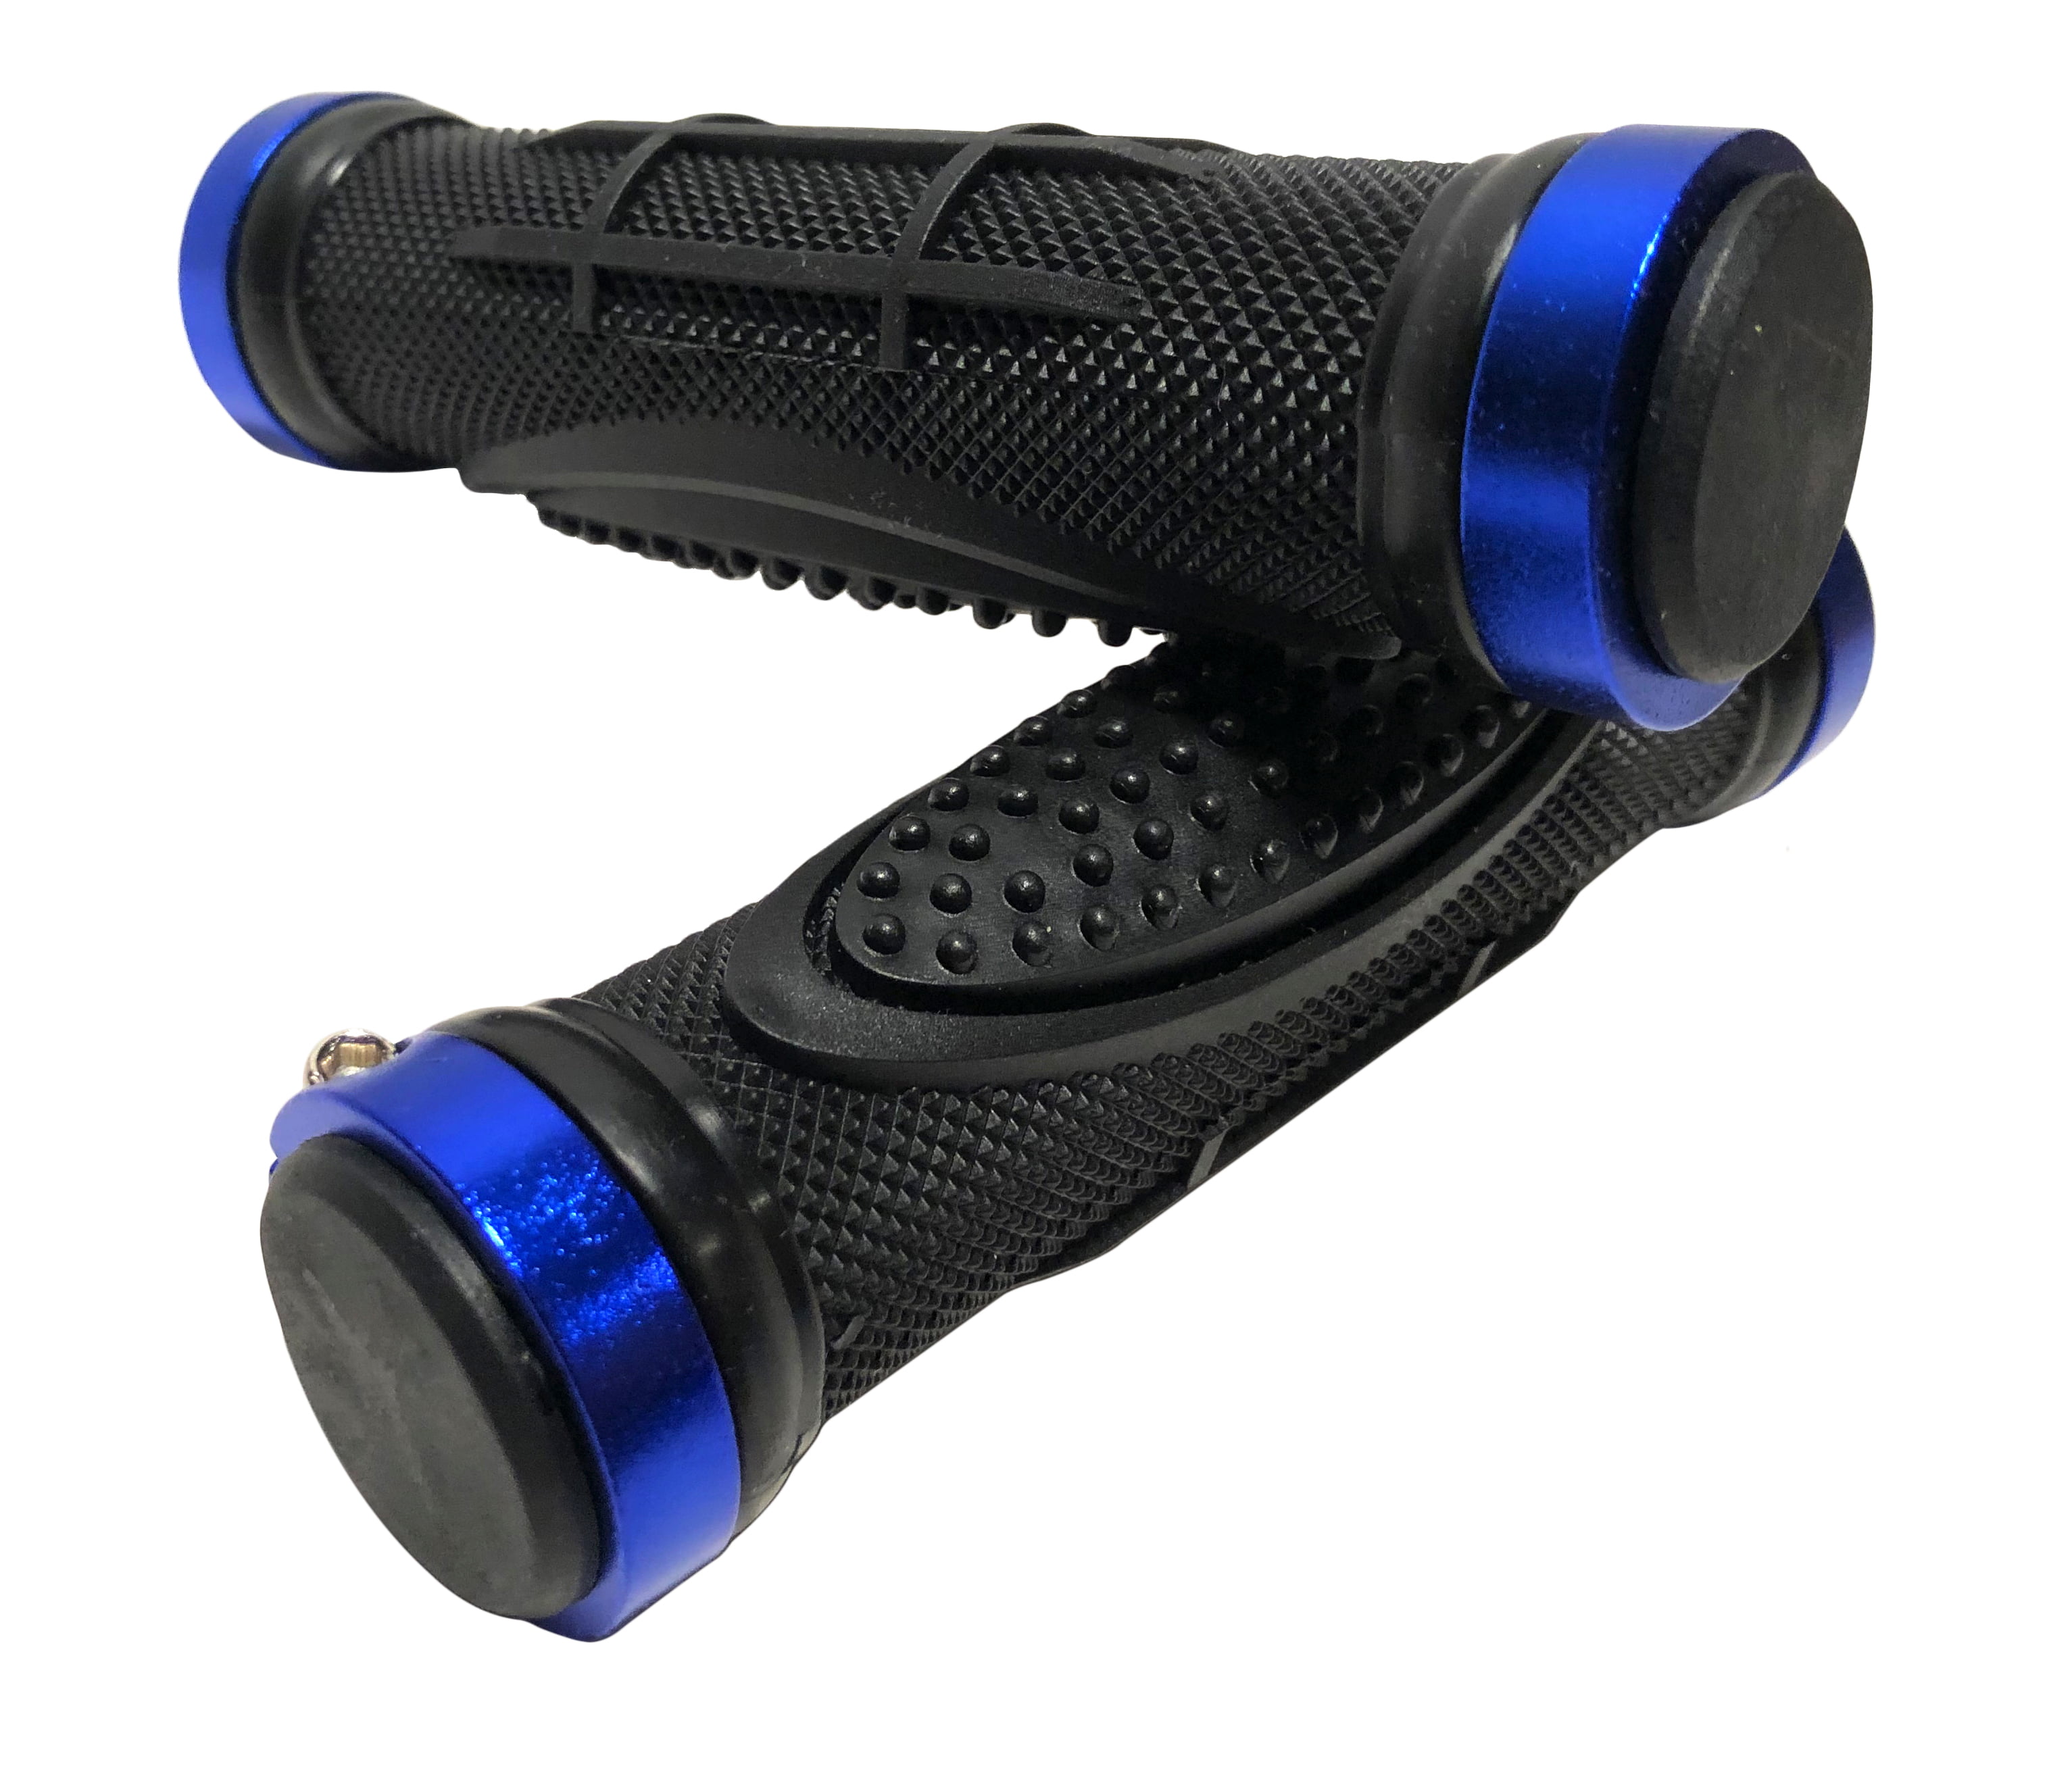 MOUNTAIN BIKE MTB BMX BICYCLE CYCLING CYCLE SCOOTER 1PR BLUE HANDLE BAR GRIPS 